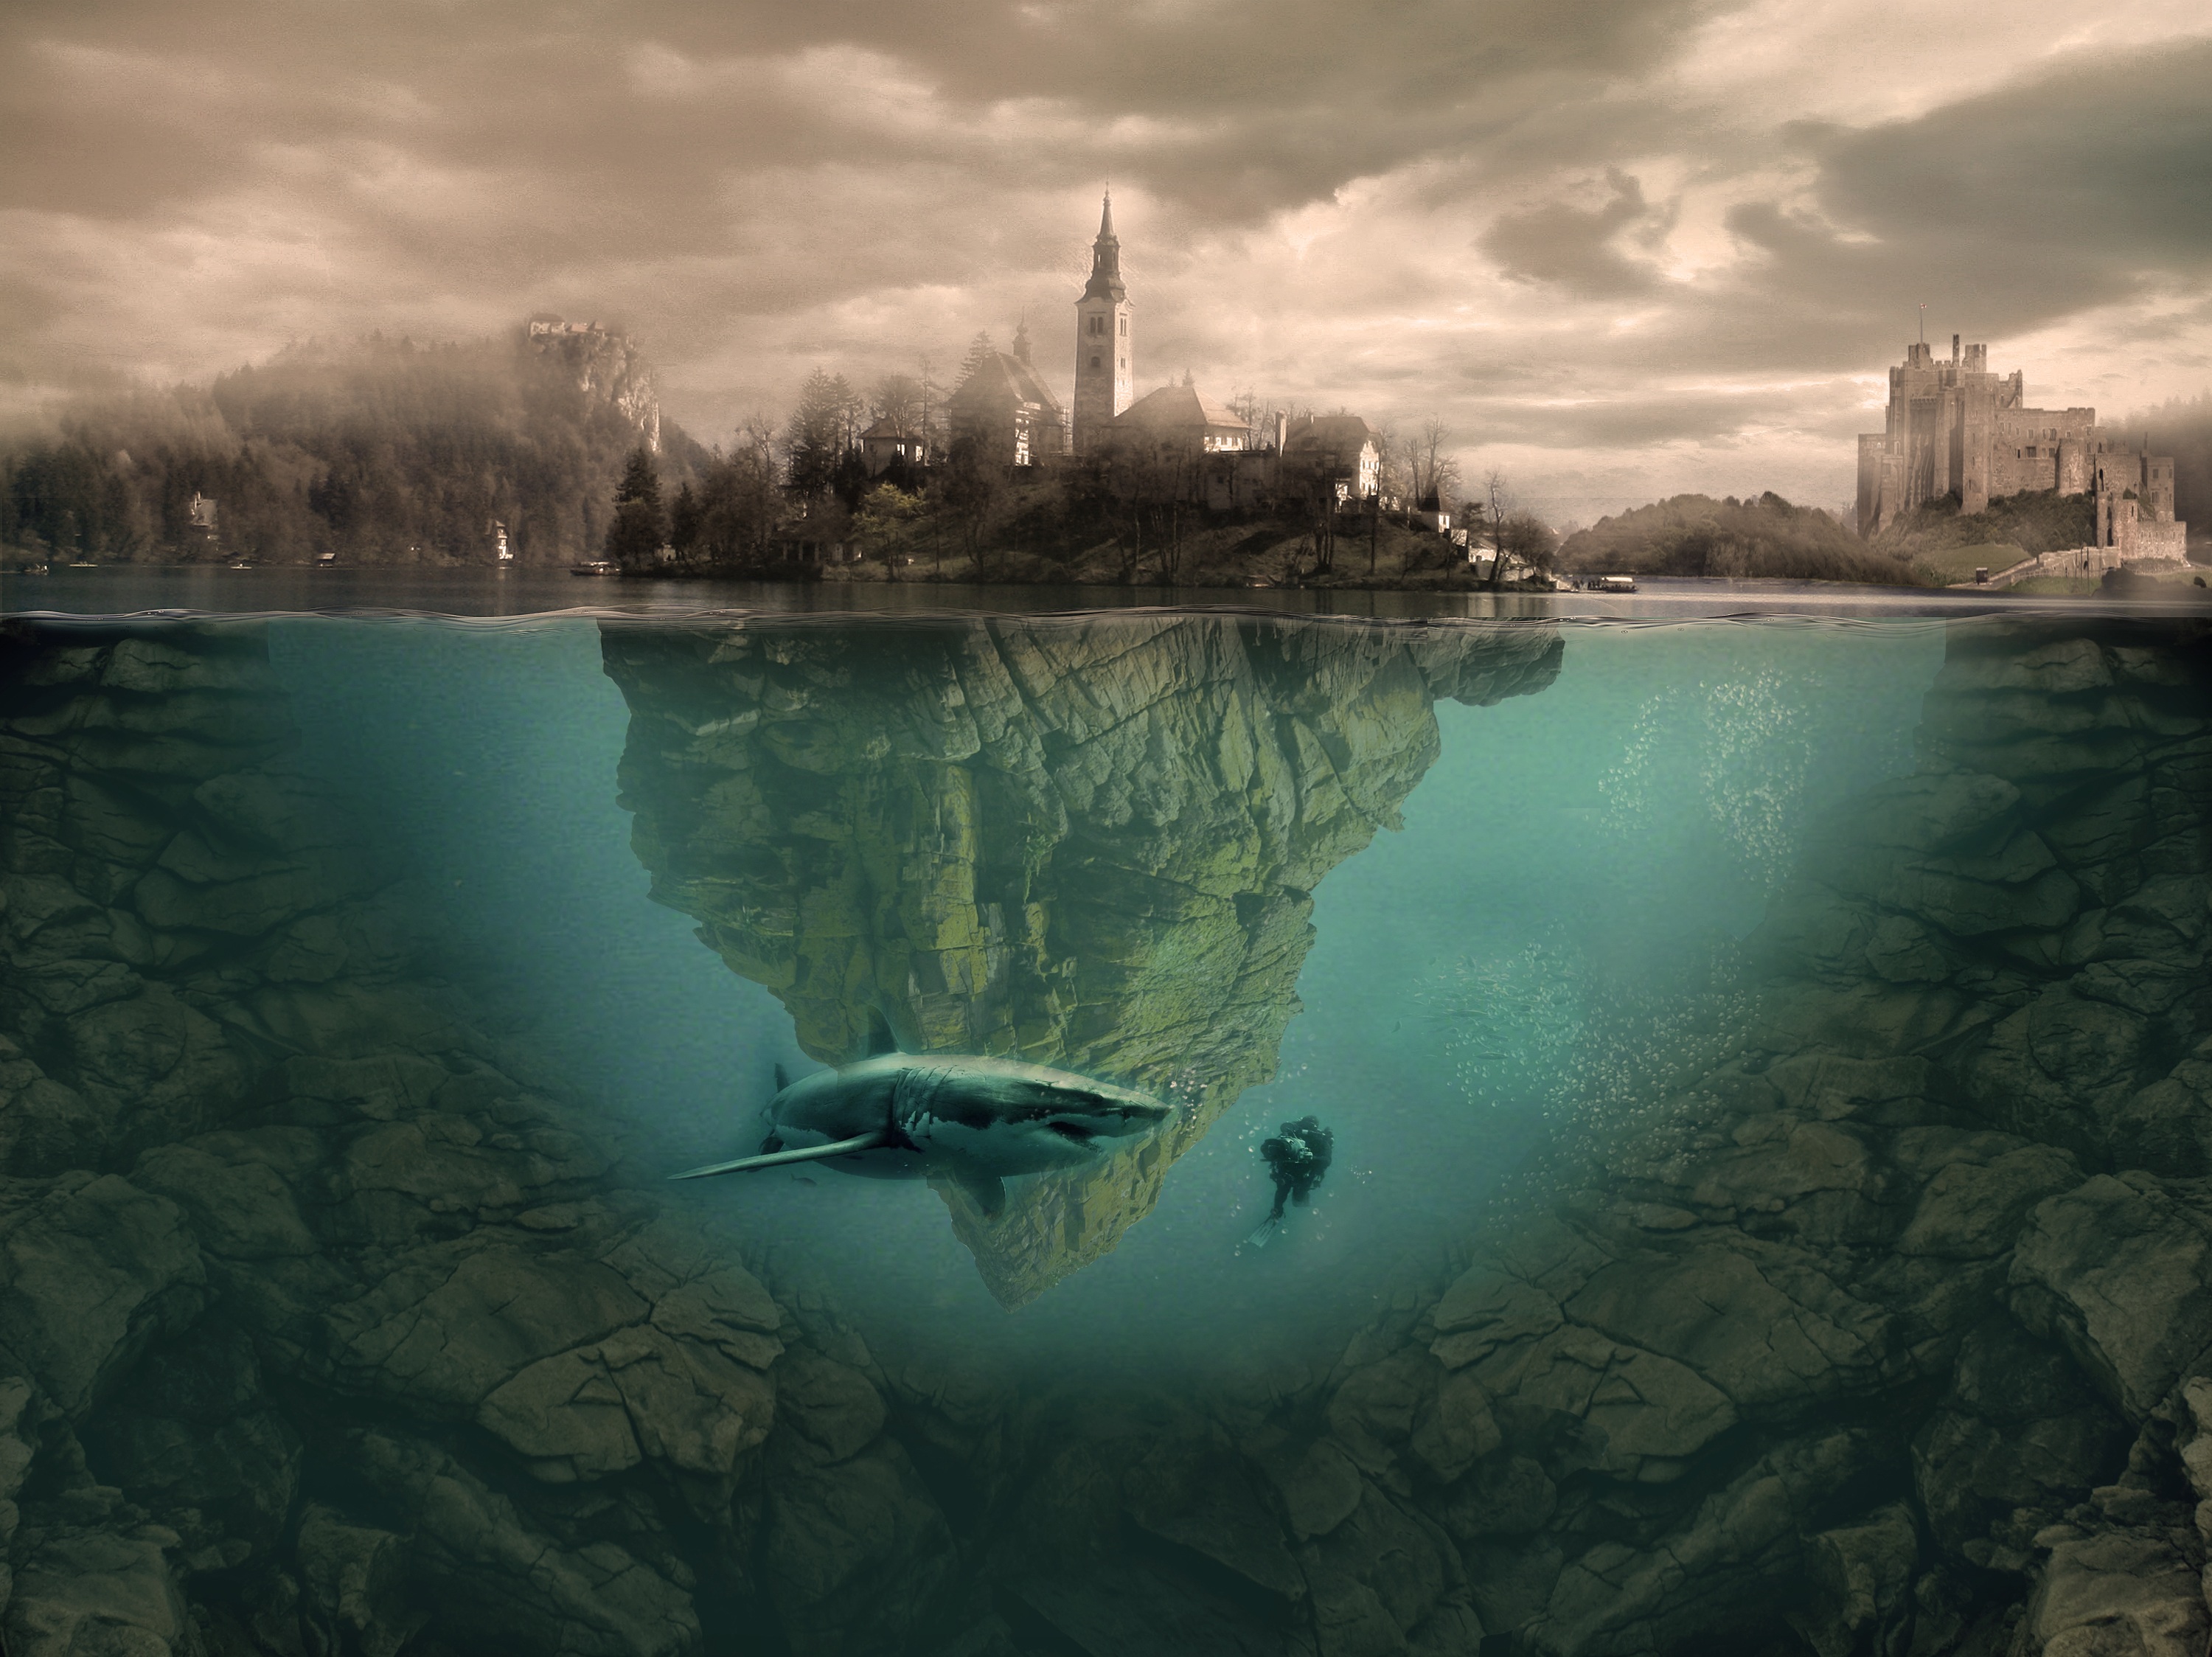 diver, shark, underwater, photography, manipulation, fantasy, town images